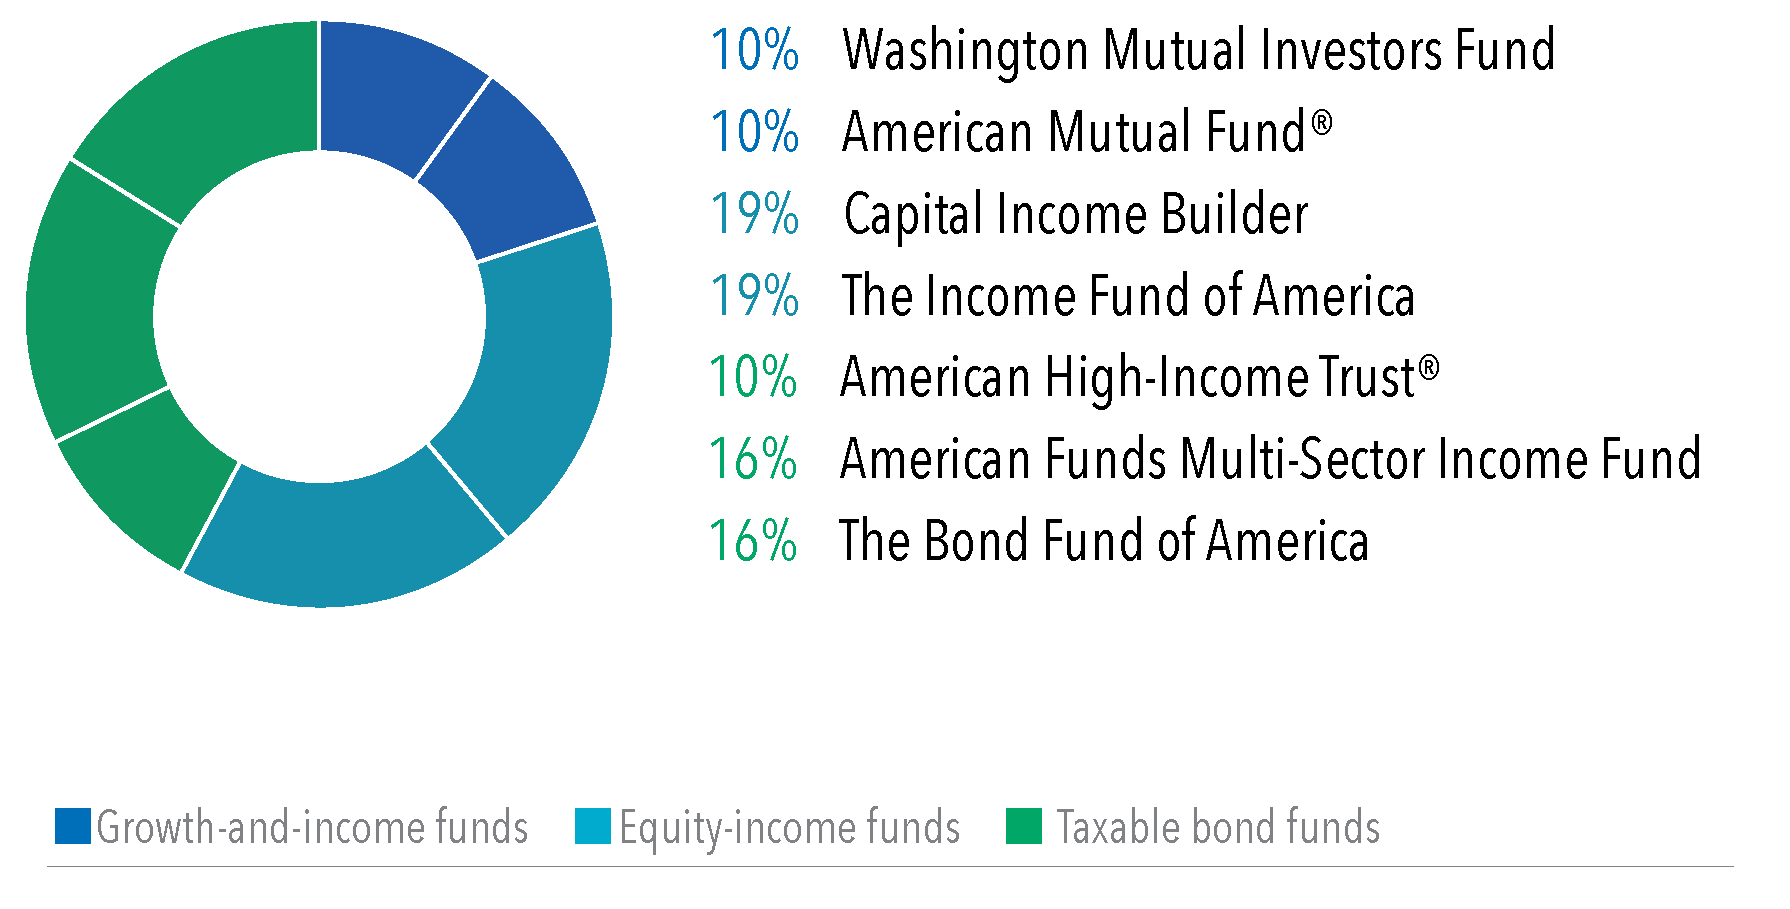 Donut chart displays a target allocation of 10% Washington Mutual Investors Fund, 10% to American Mutual Fund, 19% to Capital Income Builder, 19% to The Income Fund of America, 10% to American High-Income Trust, 16% to American Funds Multi-Sector Income Fund, 16% The Bond Fund of America.